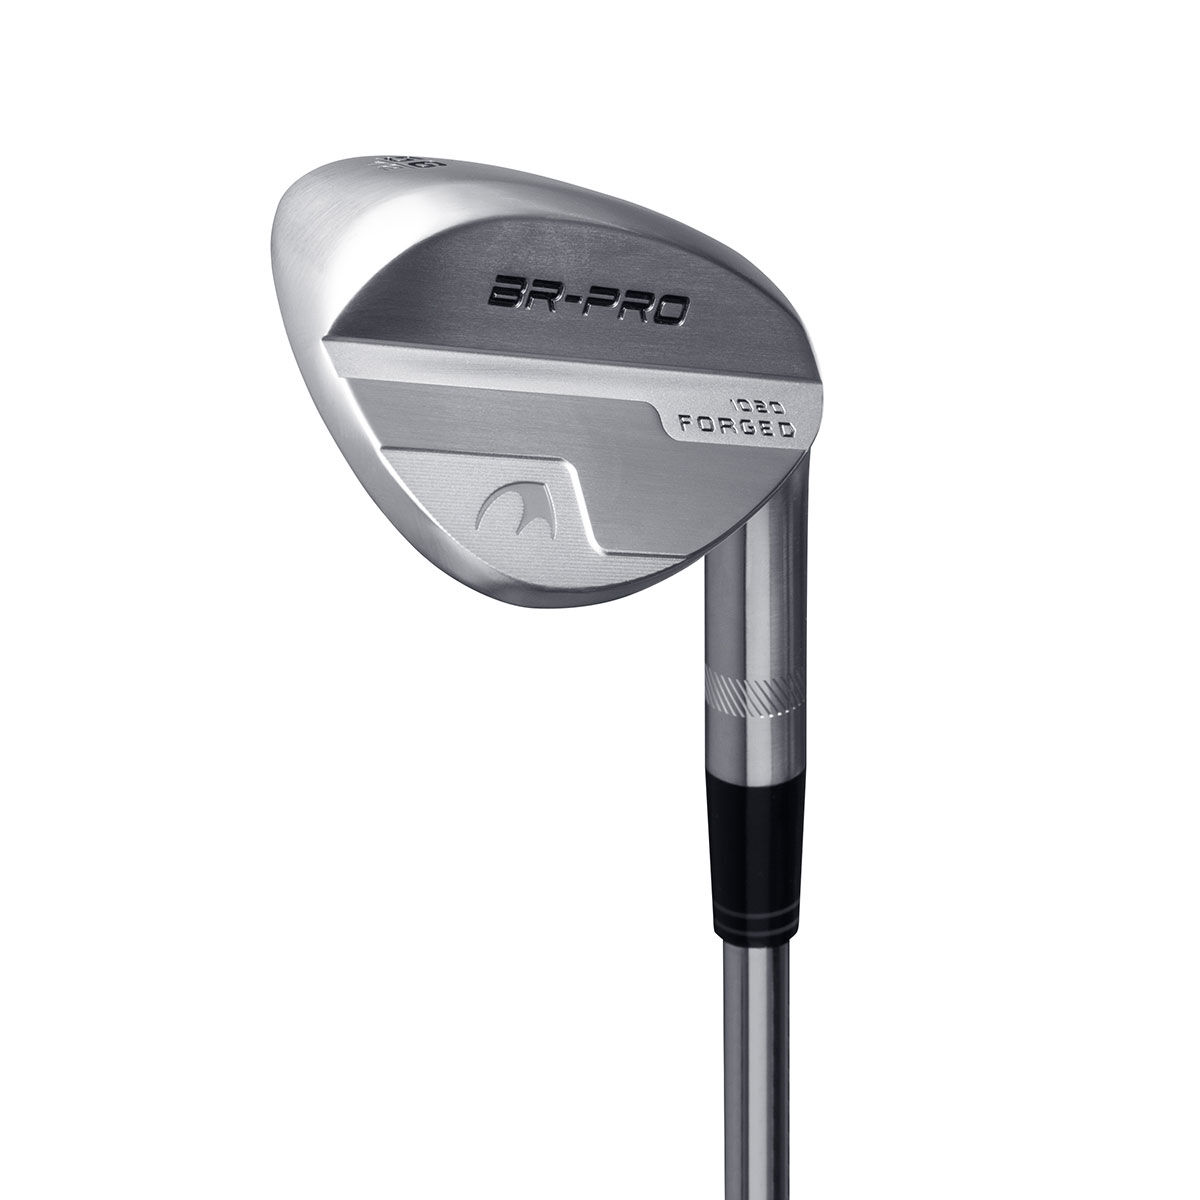 Benross Mens, Silver Br-Pro Forged Golf Wedge, Right Hand, 58deg, Standard, Steel, Size: 58" | American Golf